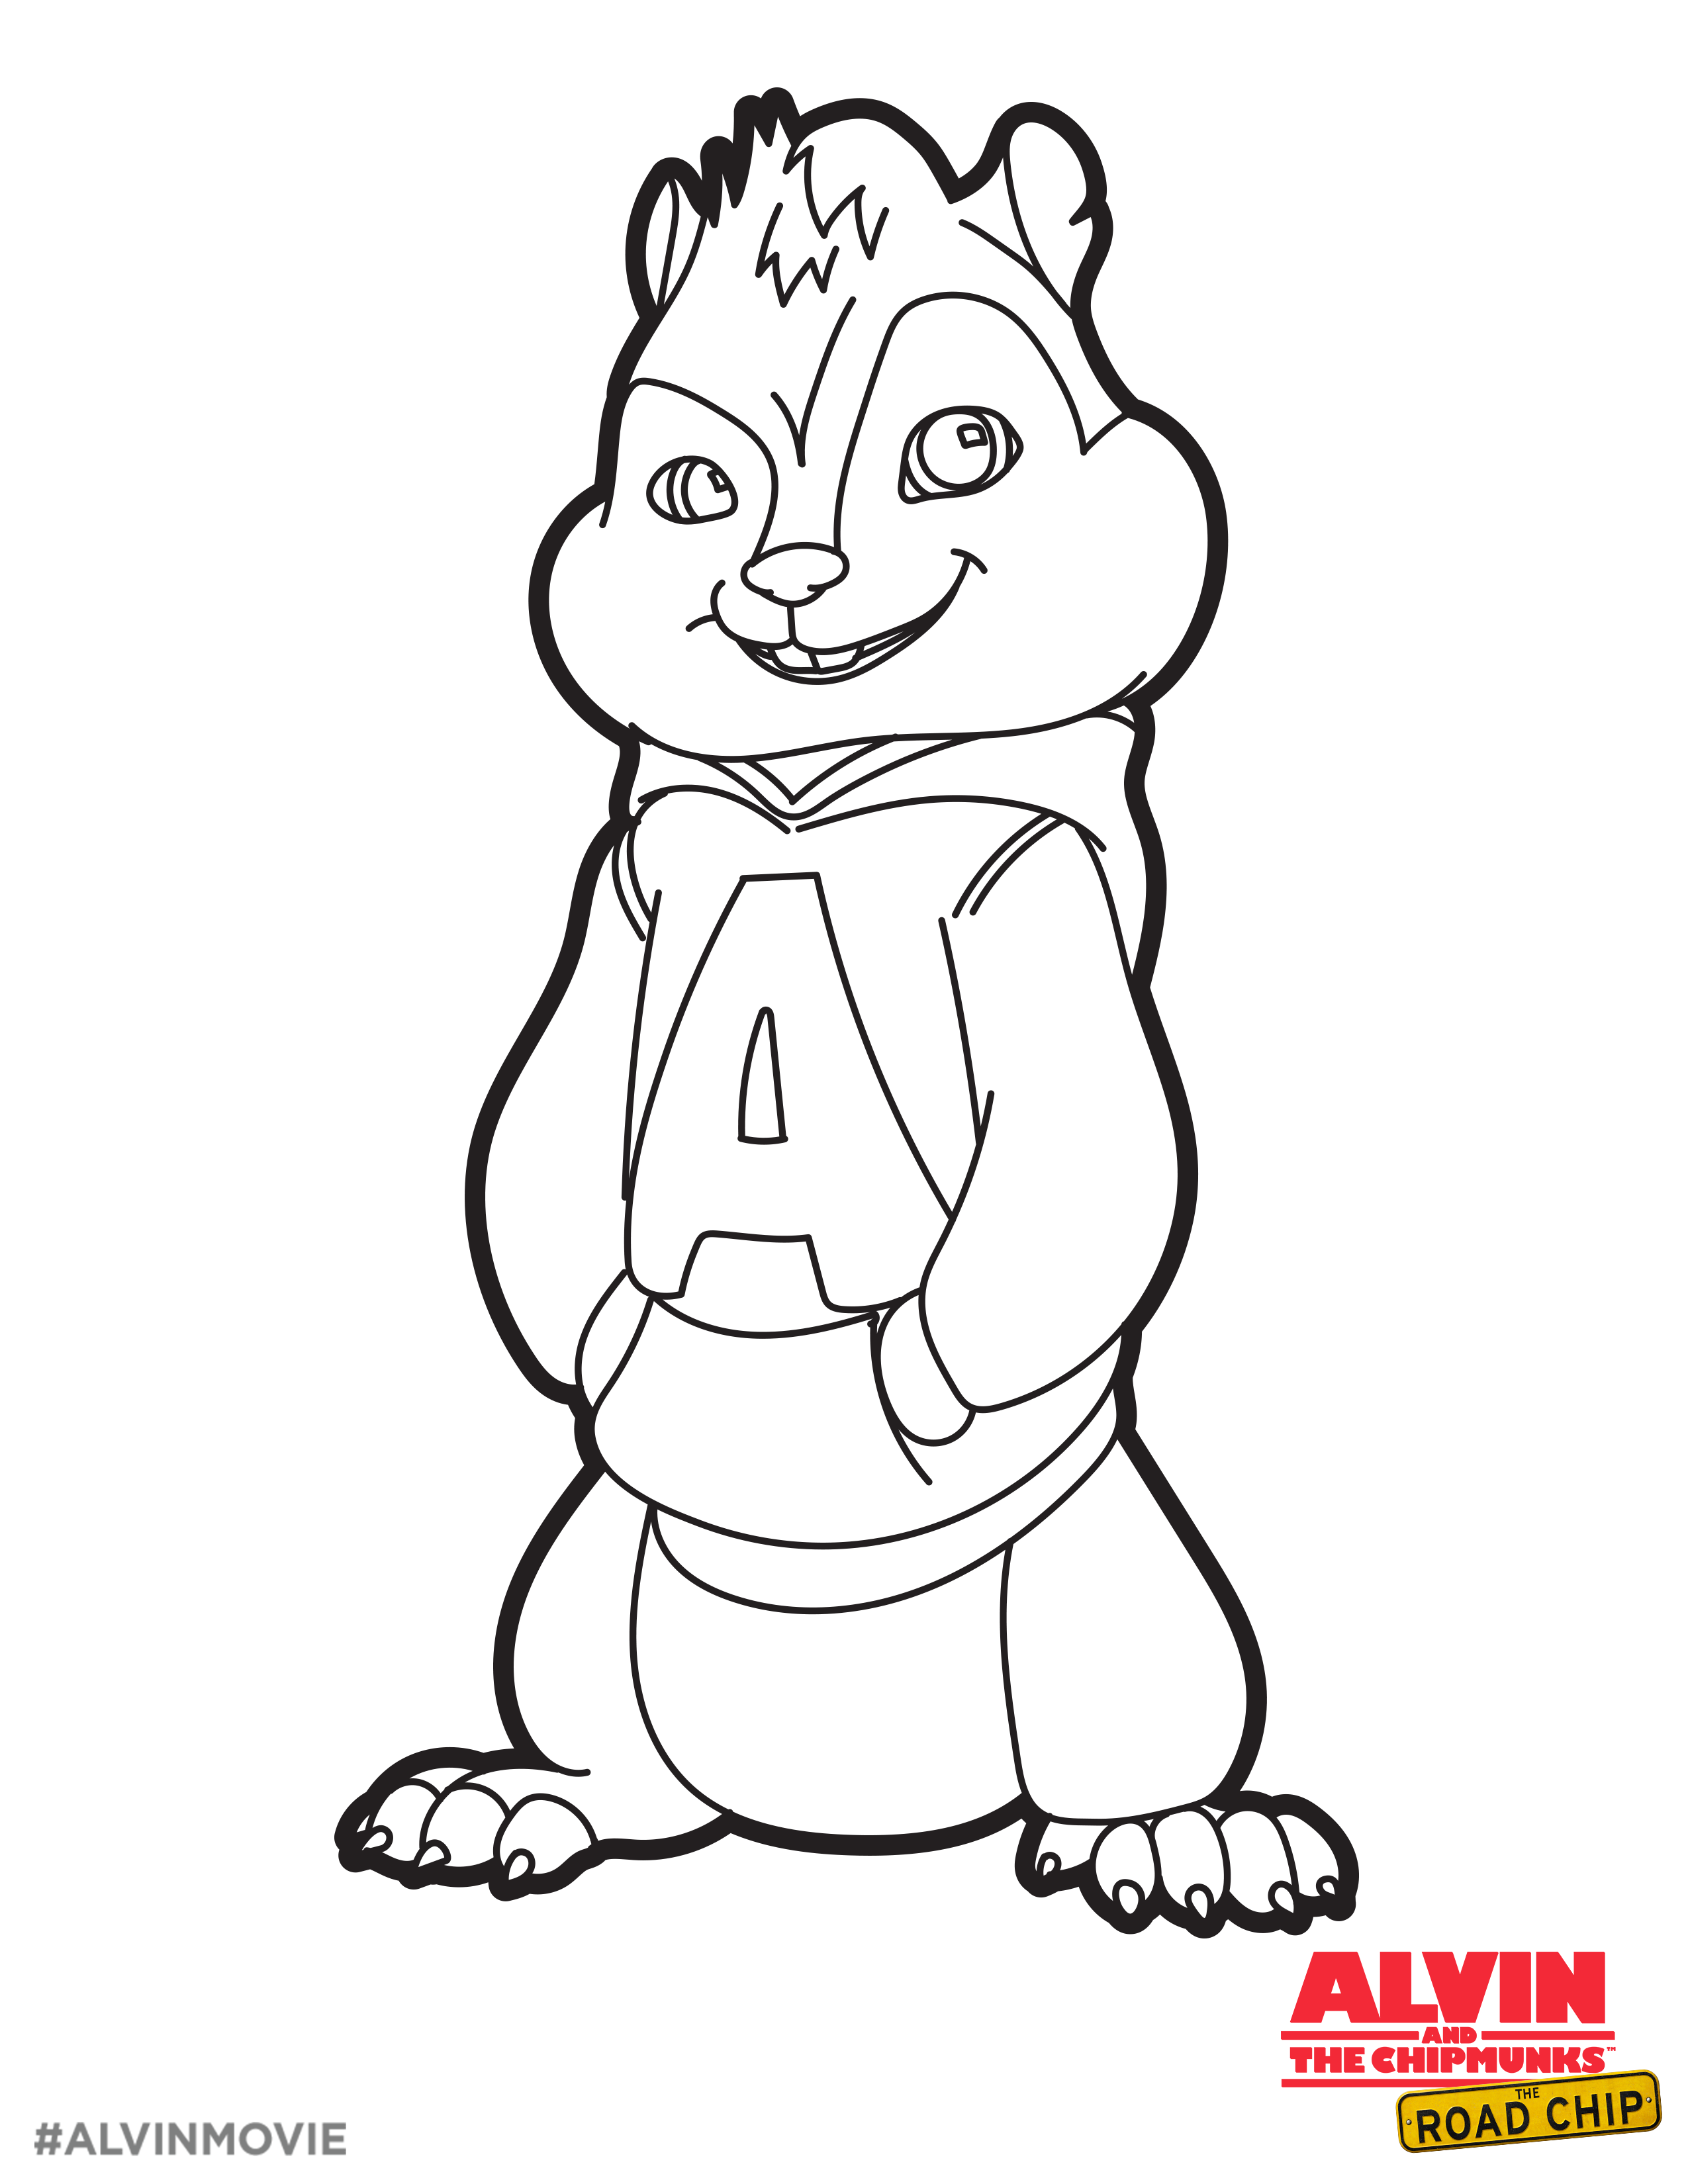 Free Alvin Coloring Printable Perfect For A Road Trip Alvin And The Chipmunks The Roa